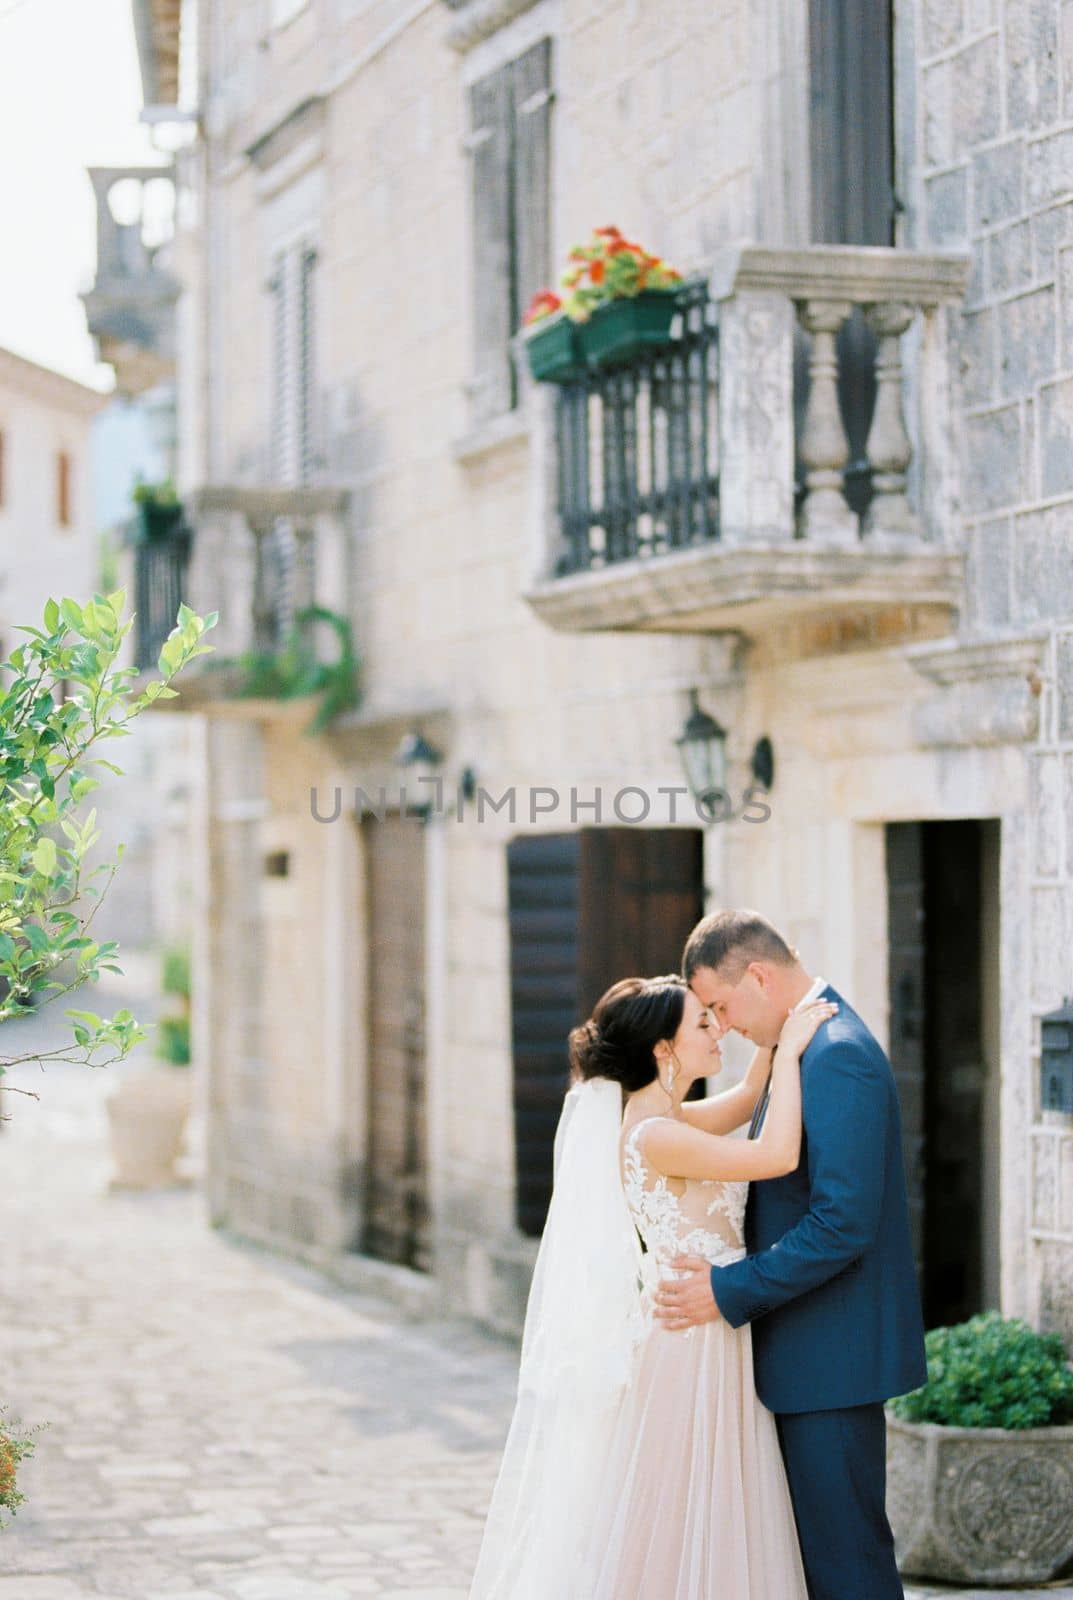 Groom hugs bride in a white dress near a stone building with balconies. High quality photo